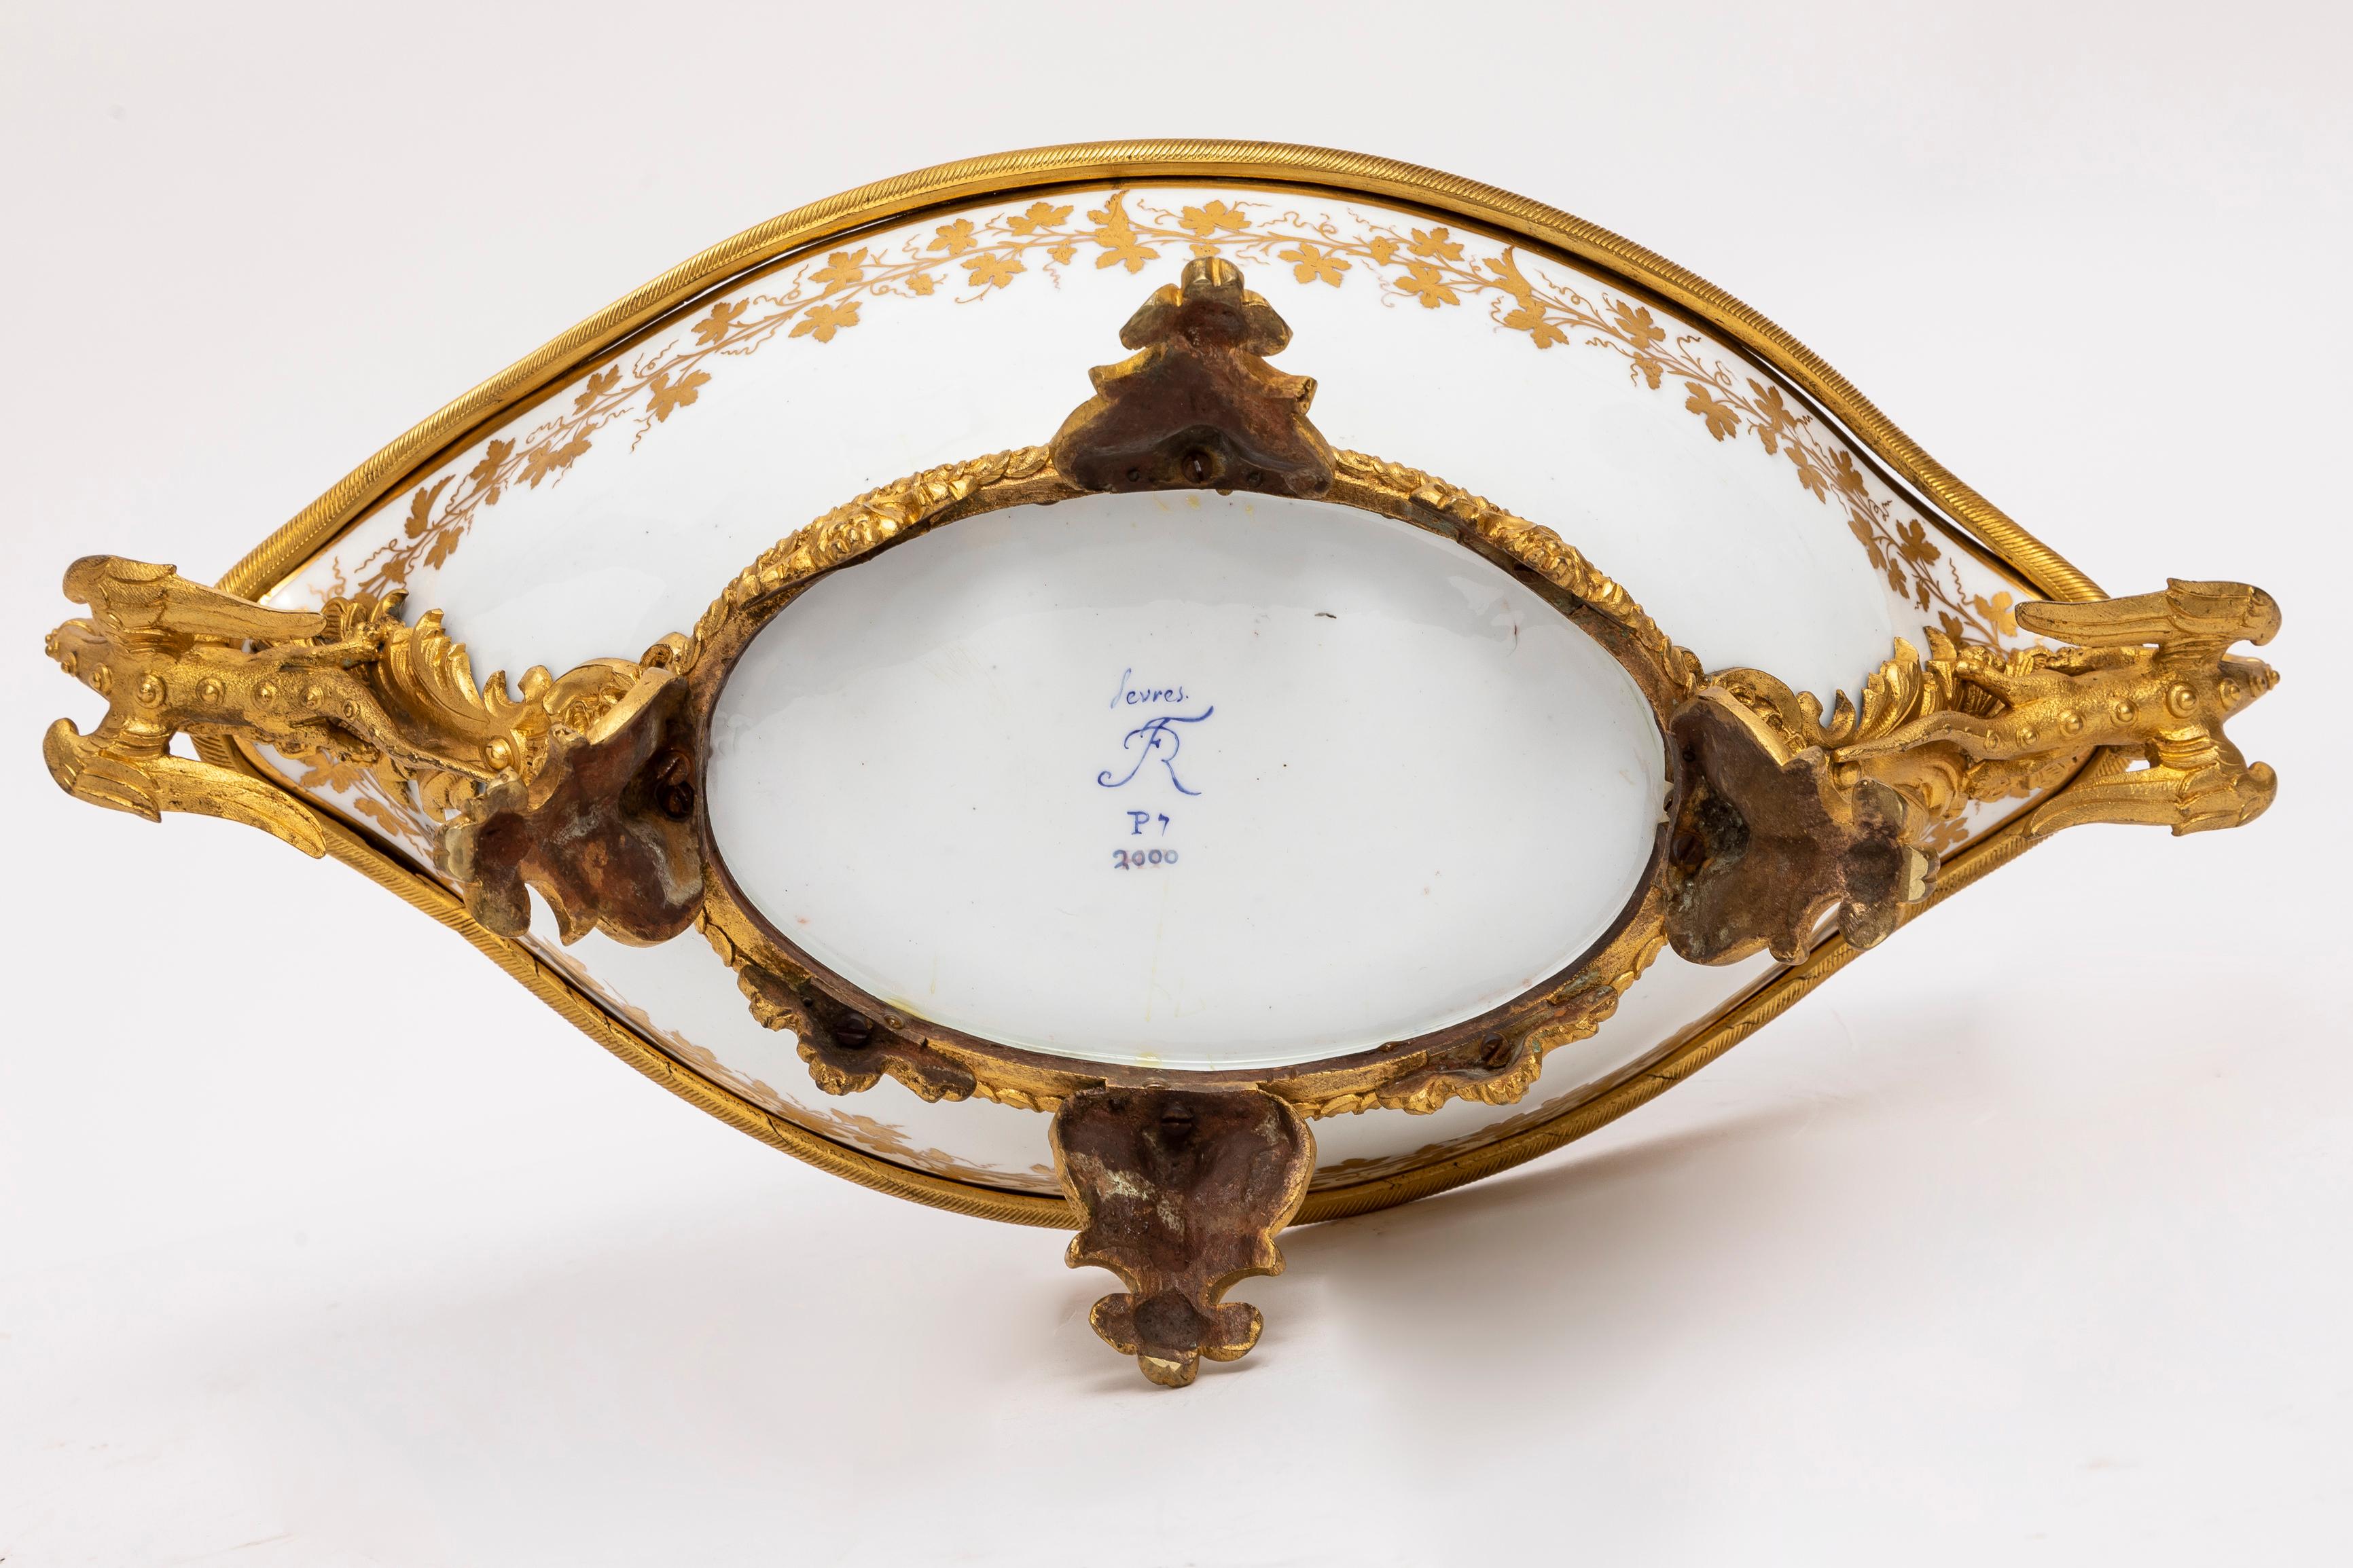 An 18th C. French Ormolu Mounted Sevres Porcelain Centerpiece w/ Dragon Handles For Sale 6